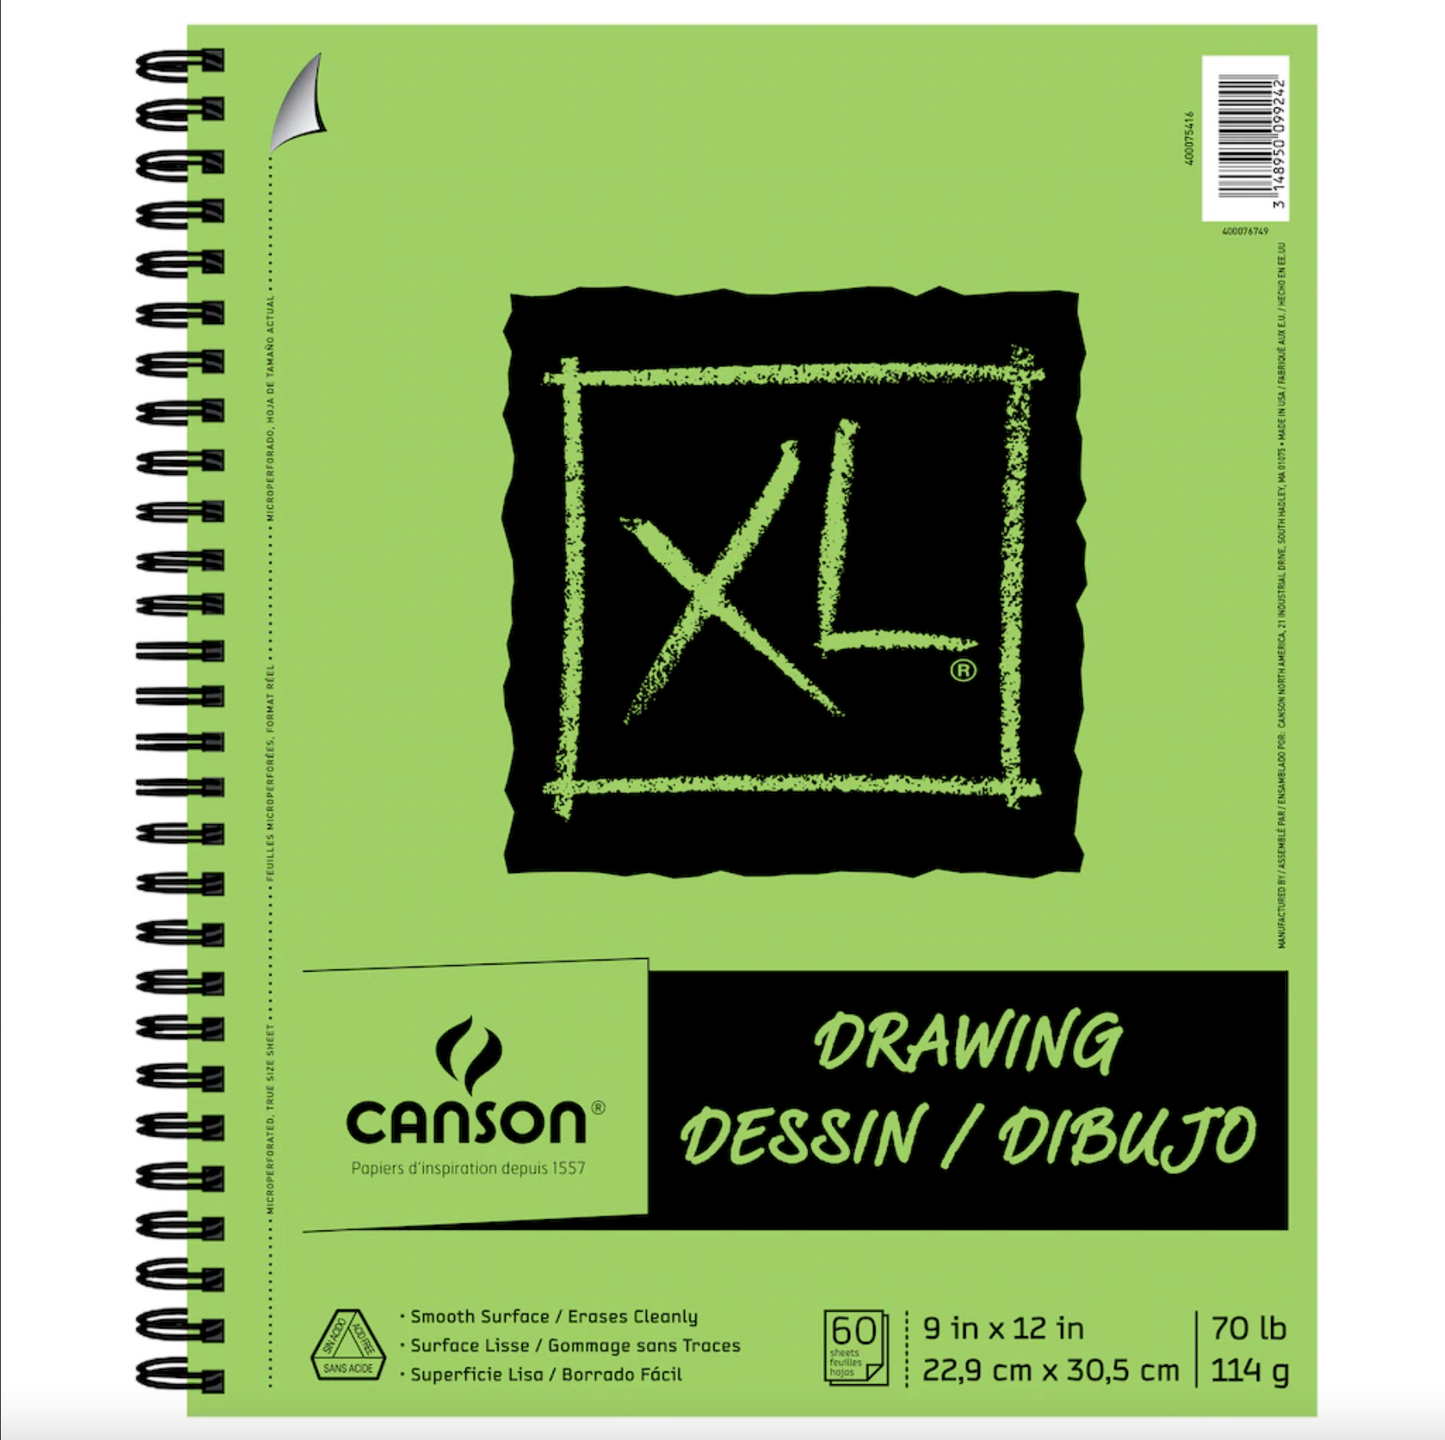 Canson XL Drawing Pad - 9 x 12 inches by Canson - K. A. Artist Shop